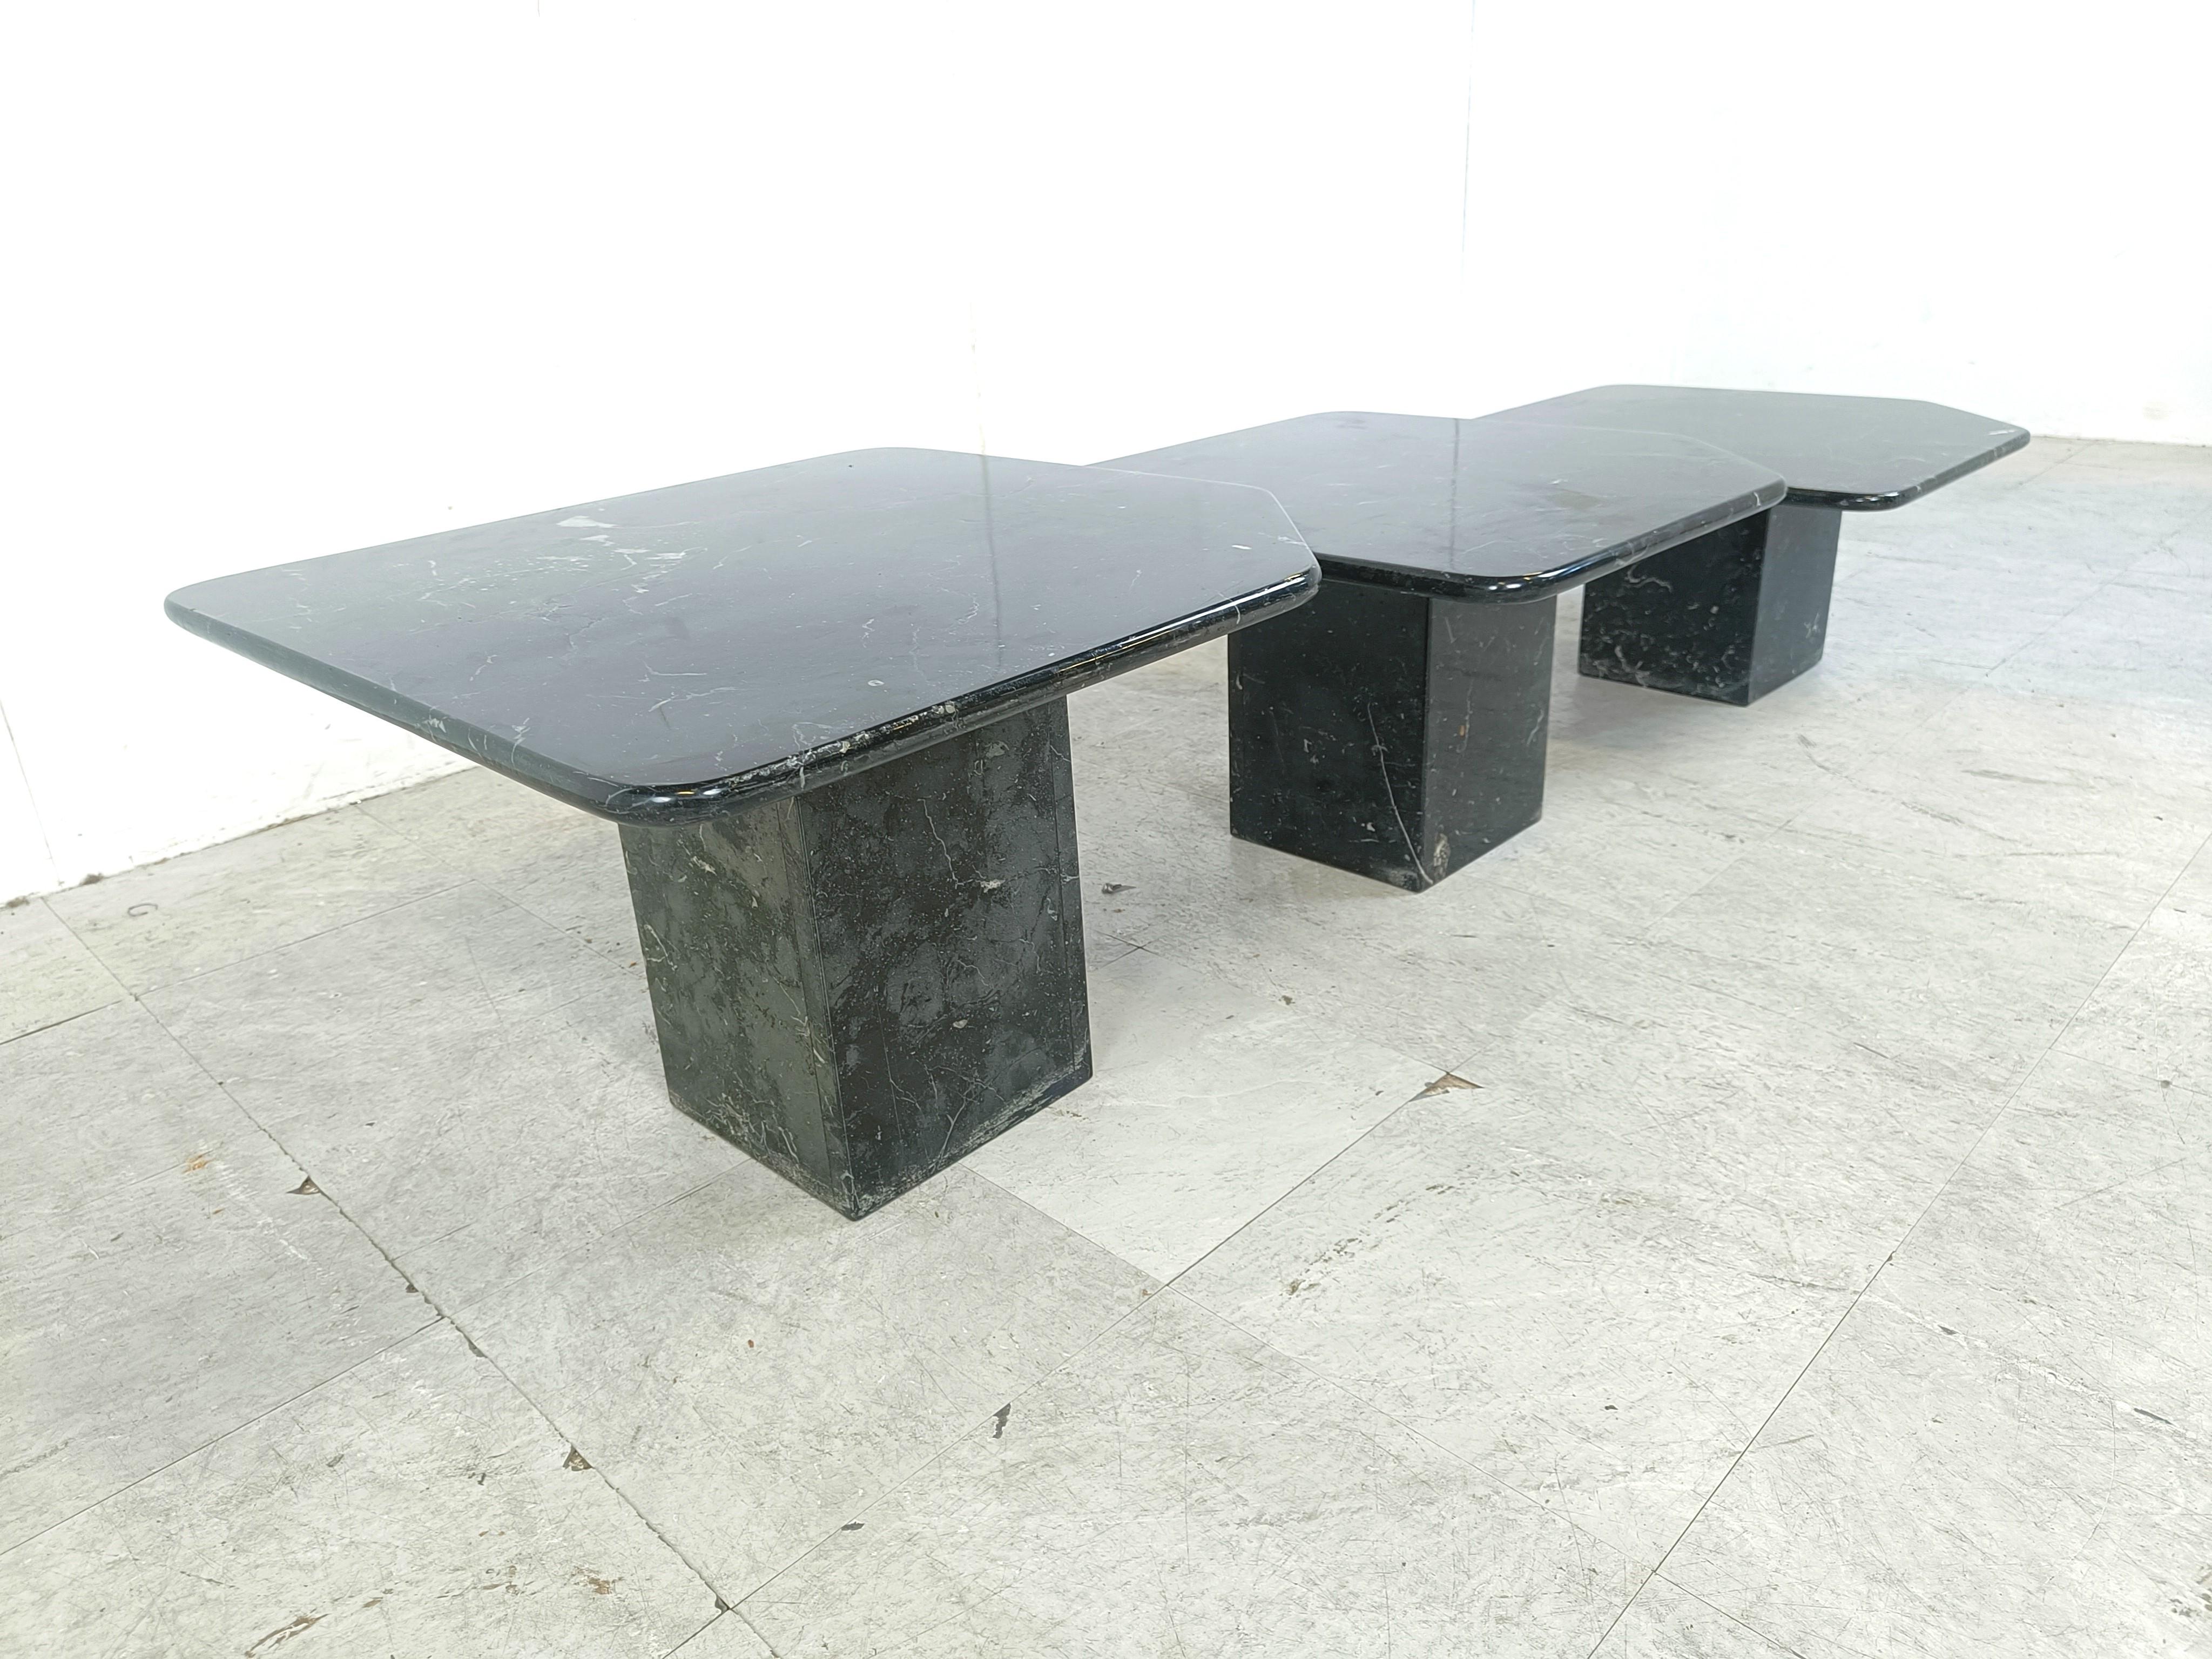 Set of 1970s italian marble nesting tables or side tables.

The tables can be set up in different compositions. Timeless items.

Beautiful colour and natural vaining.

Very good condition

1970s - italy

Dimensions:
Largest table
Height: 40cm
Width